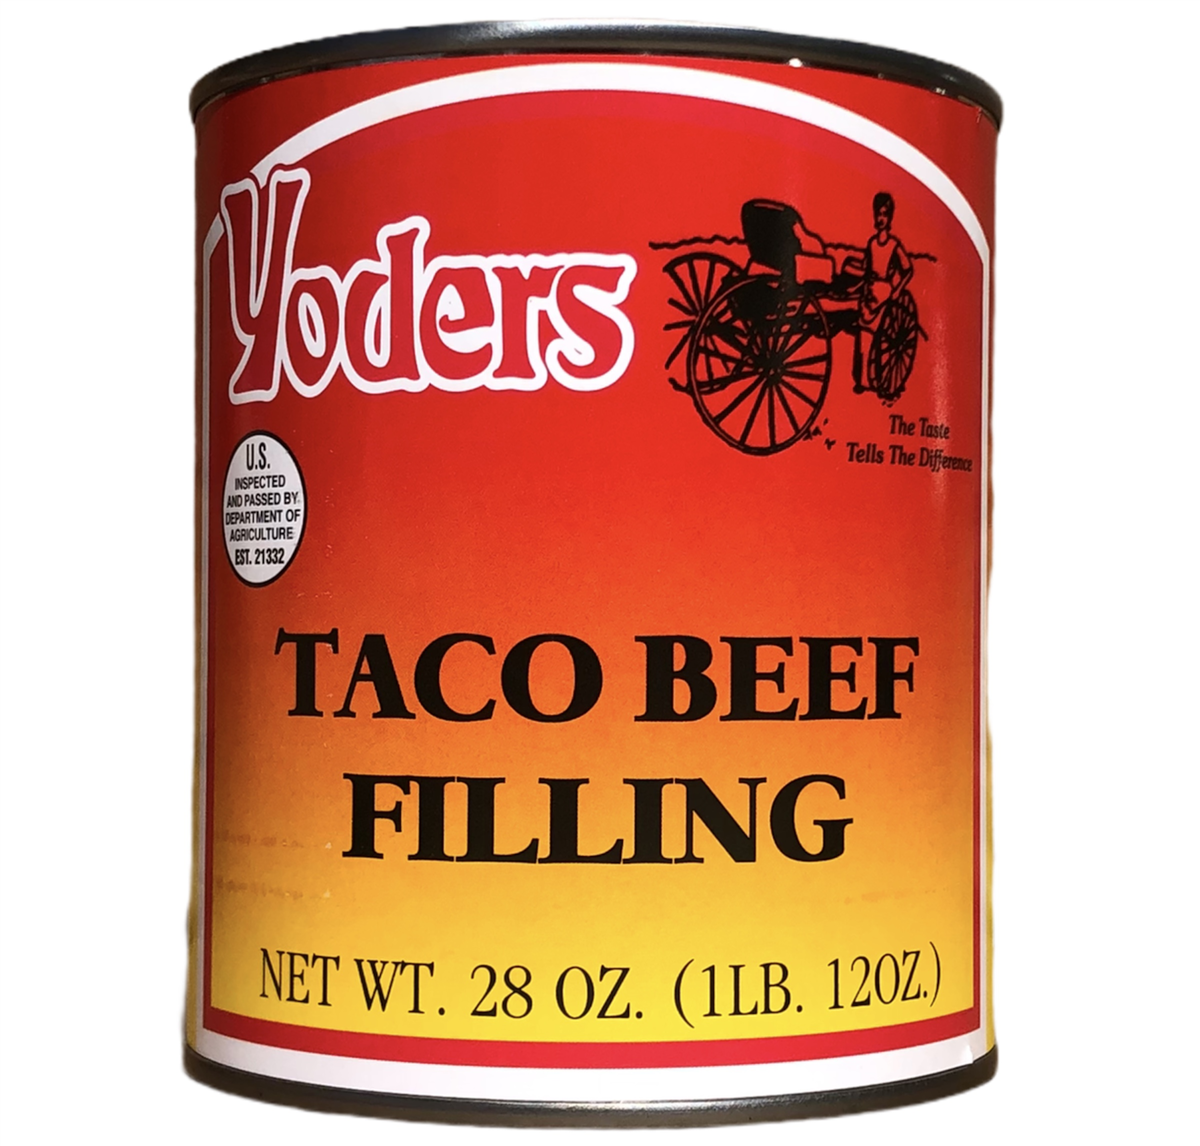 Case (12 Cans) of Yoder's fresh REAL Canned Taco Beef Filling